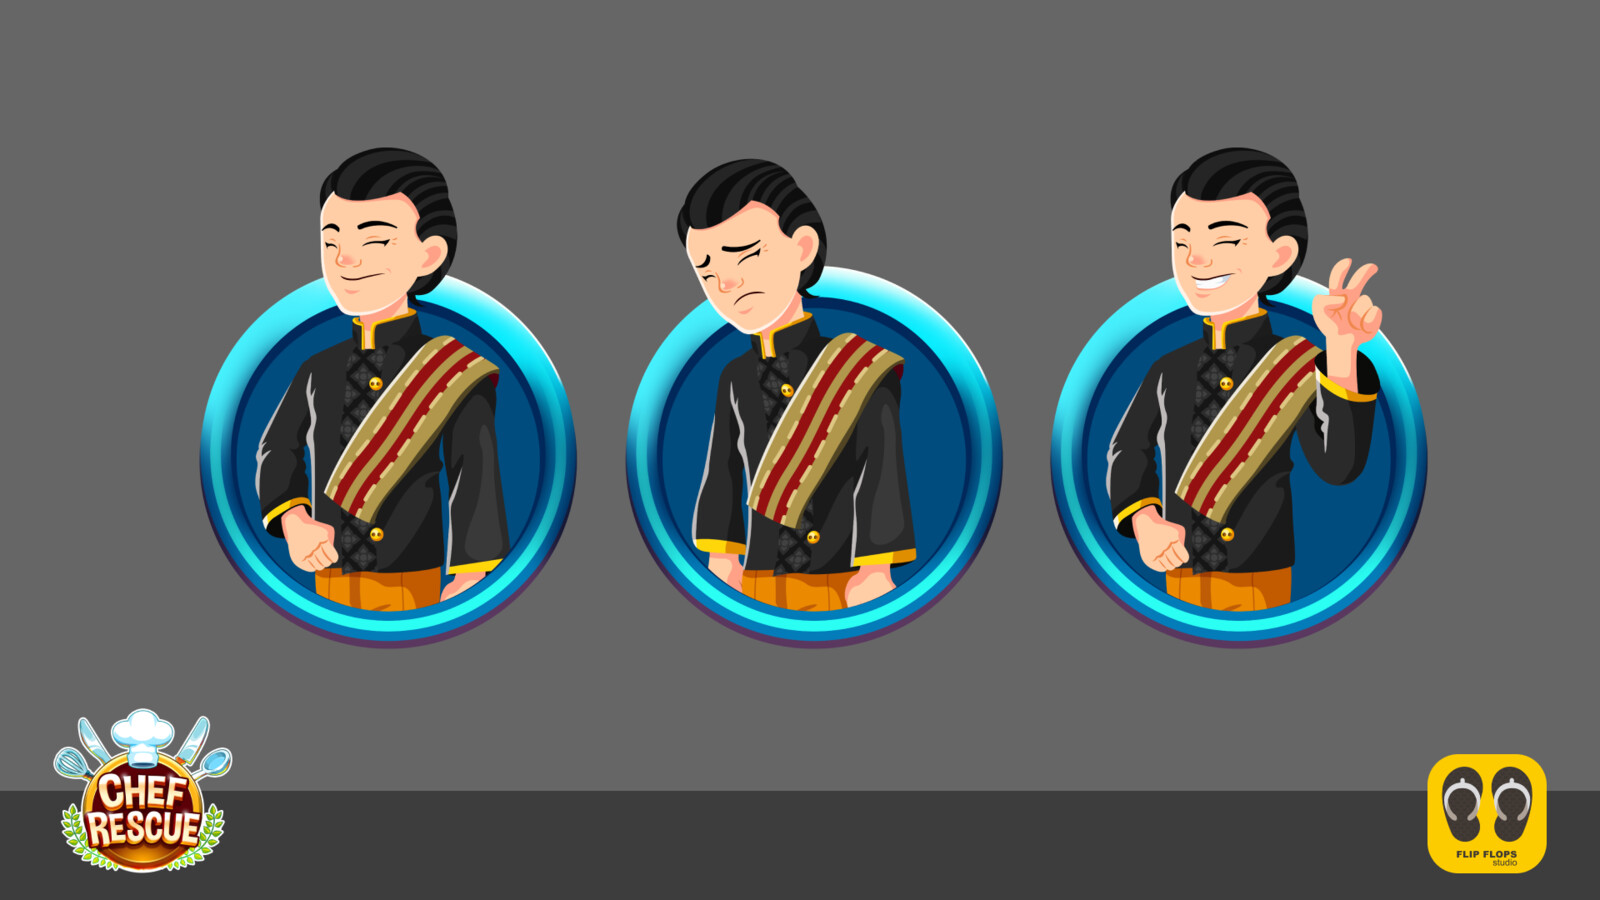 Final artwork of the chef in 3 positions for animation.